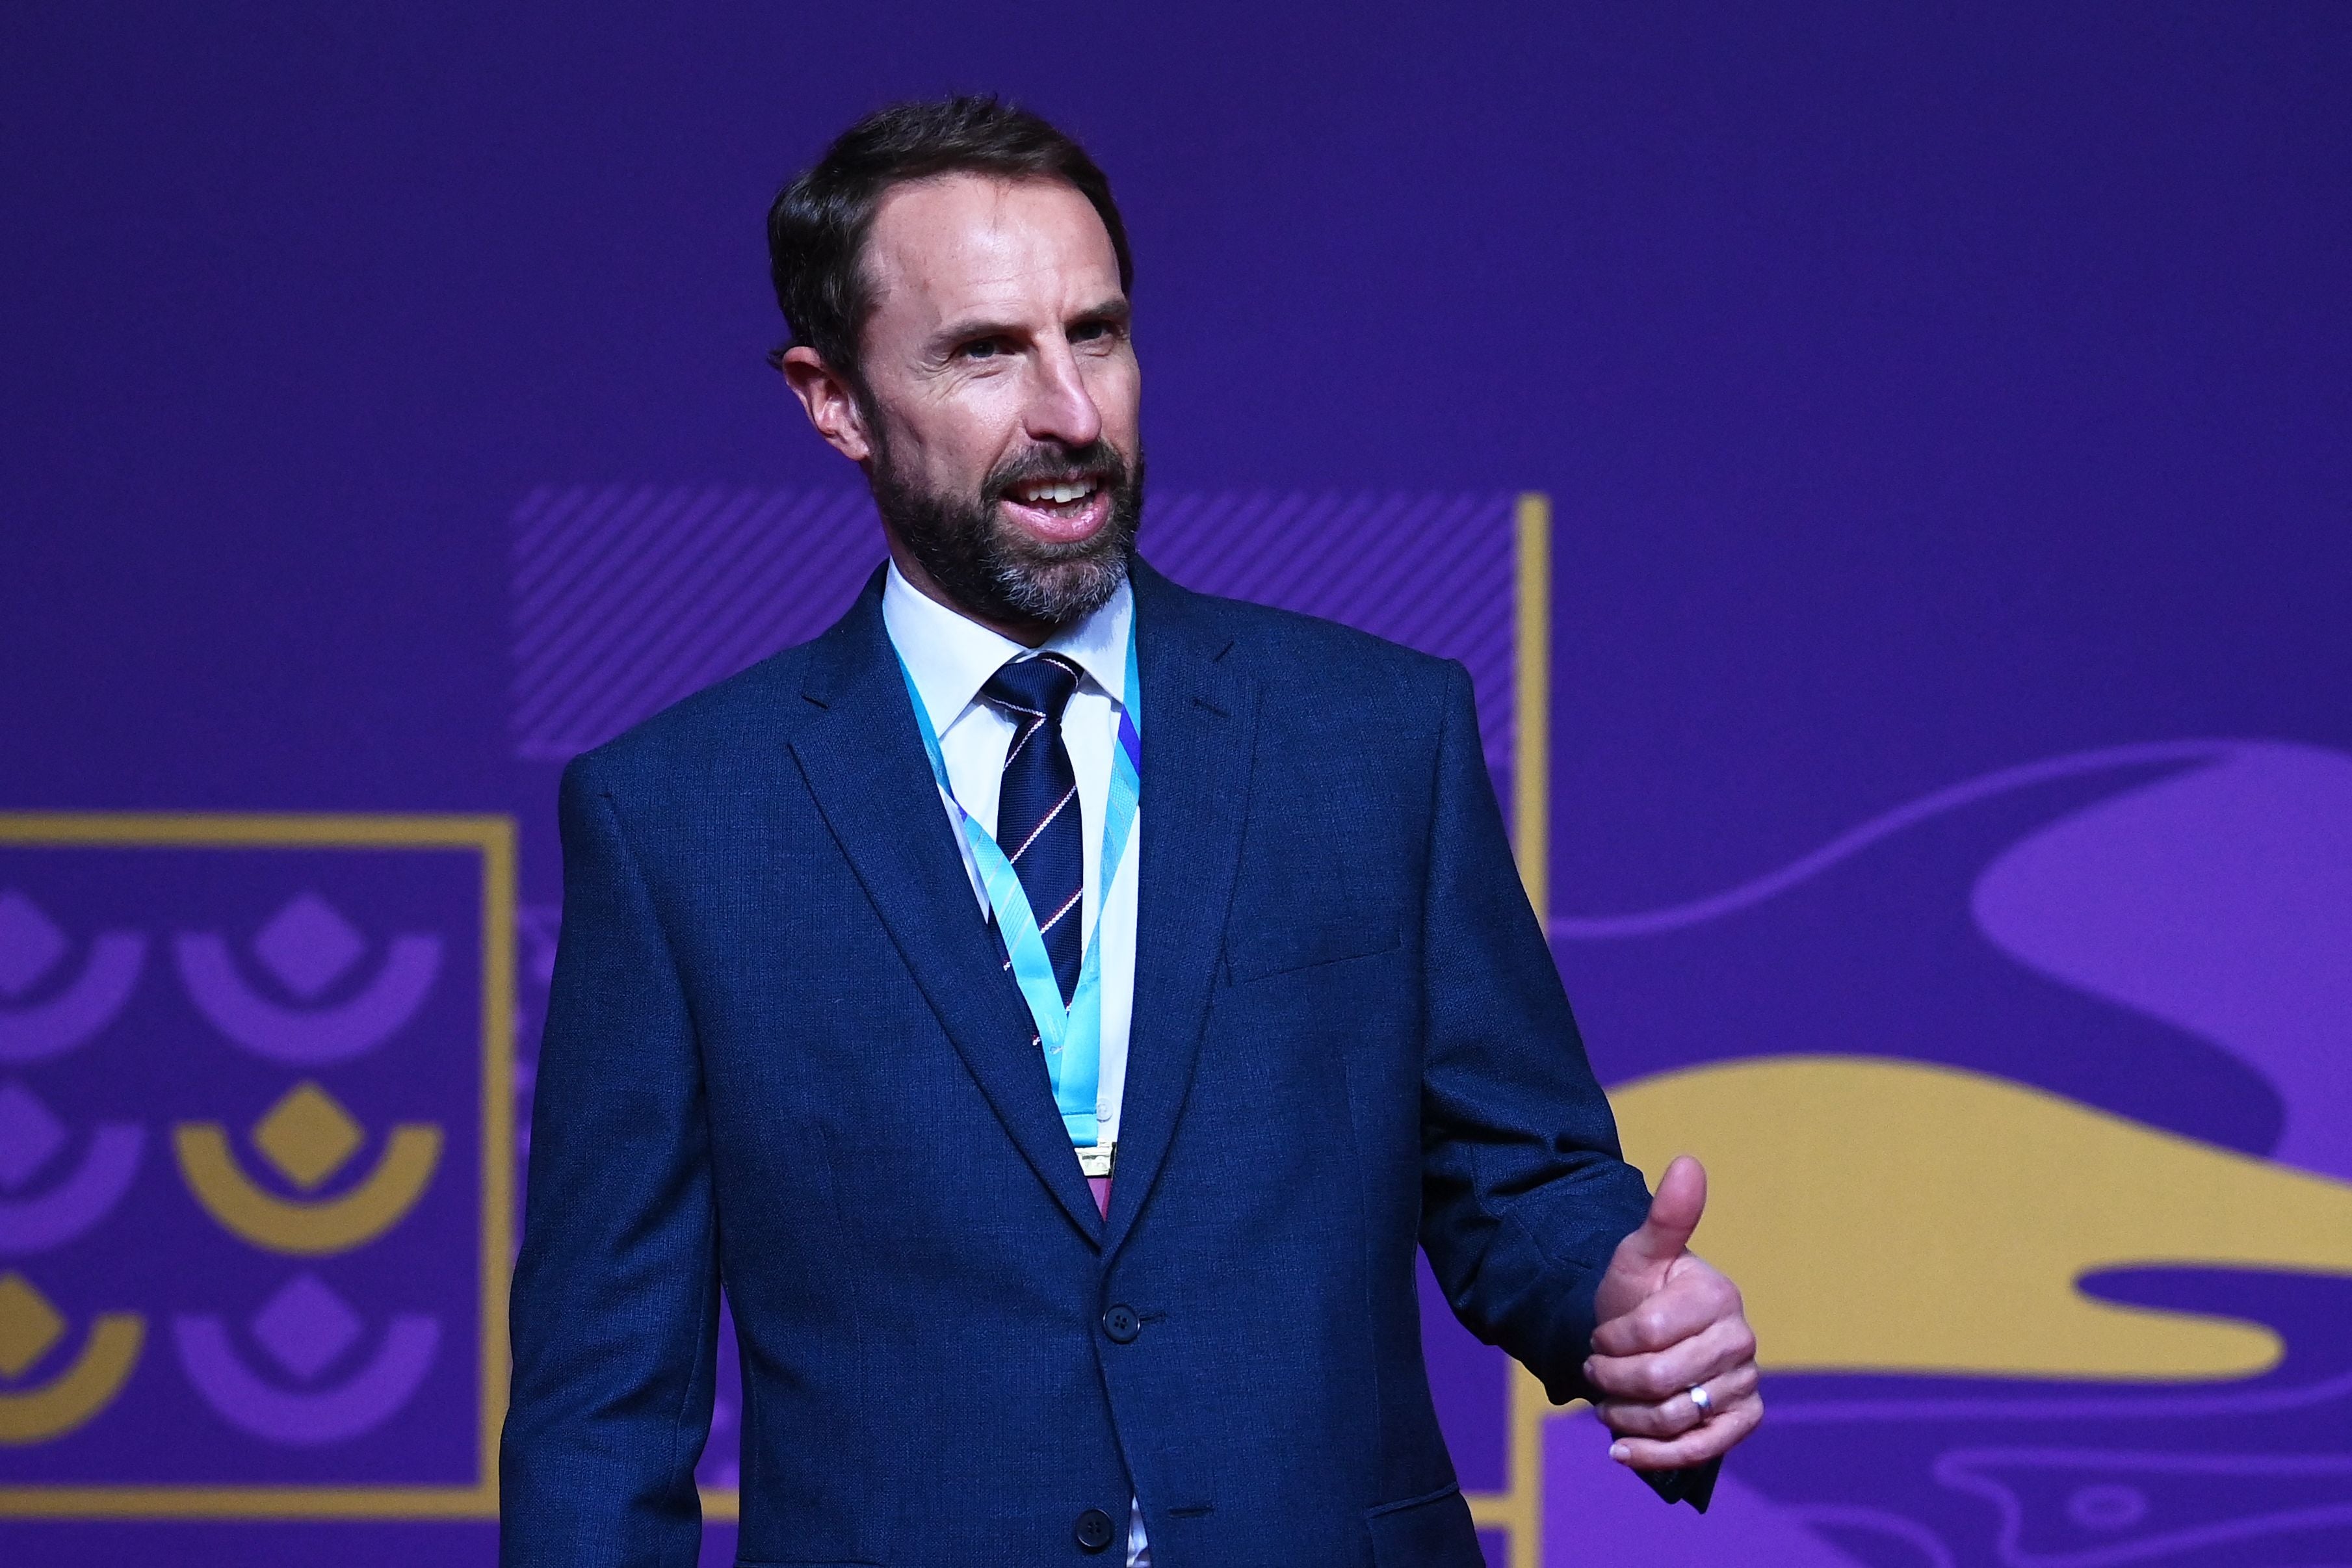 Gareth Southgate was in Doha to watch the World Cup draw